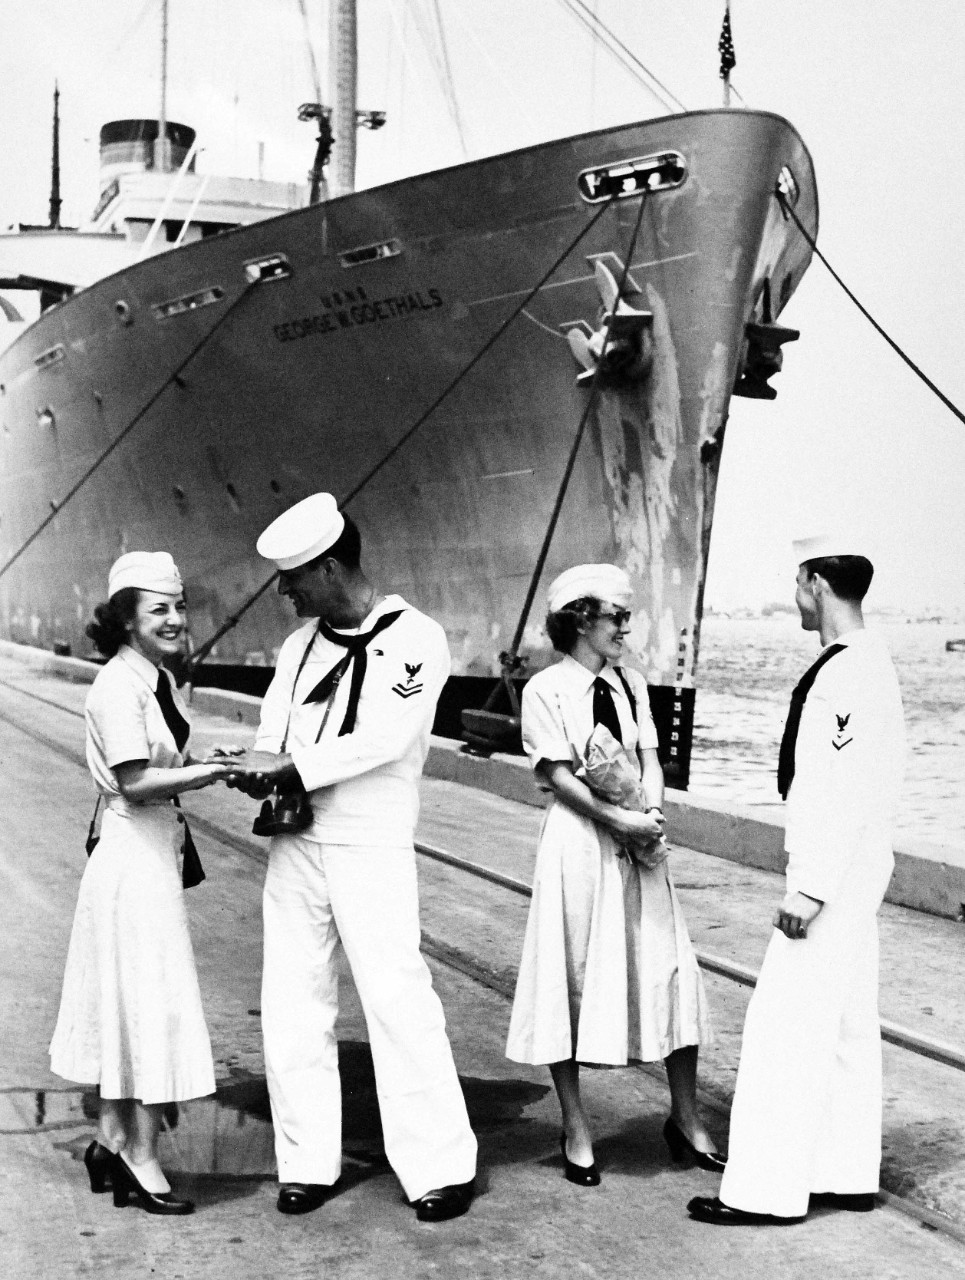 USN 709026:   Liberty Expires for WAVES, October 1953.   A few minutes before the girls’ liberty was up, their sailor escorts returned the WAVES to their ship, USNS George M. Goethals (T-AP-182).    The two young ladies thanked their escorts for a pleasant time.  In a reversal of usual Navy routine, the WAVES reported onboard their ship  (in background) – this time, the boys were “left behind.”   Left to right:  Paluzzi, LaFreniere, Myers and Baker.   Photograph released October 26, 1953.   Master Caption:   Navy Accepts Women Volunteers for Duty on the High Seas.   For the first time in history, the U.S. Navy has accepted volunteers for duty on the high seas from women in the enlisted WAVES.  Those eligible were WAVES of the Hospital Corps to fill sixty-three billets on ships of the Military Sea Transportation Service.   Official U.S. Navy photograph, now in the collections of the National Archives.   